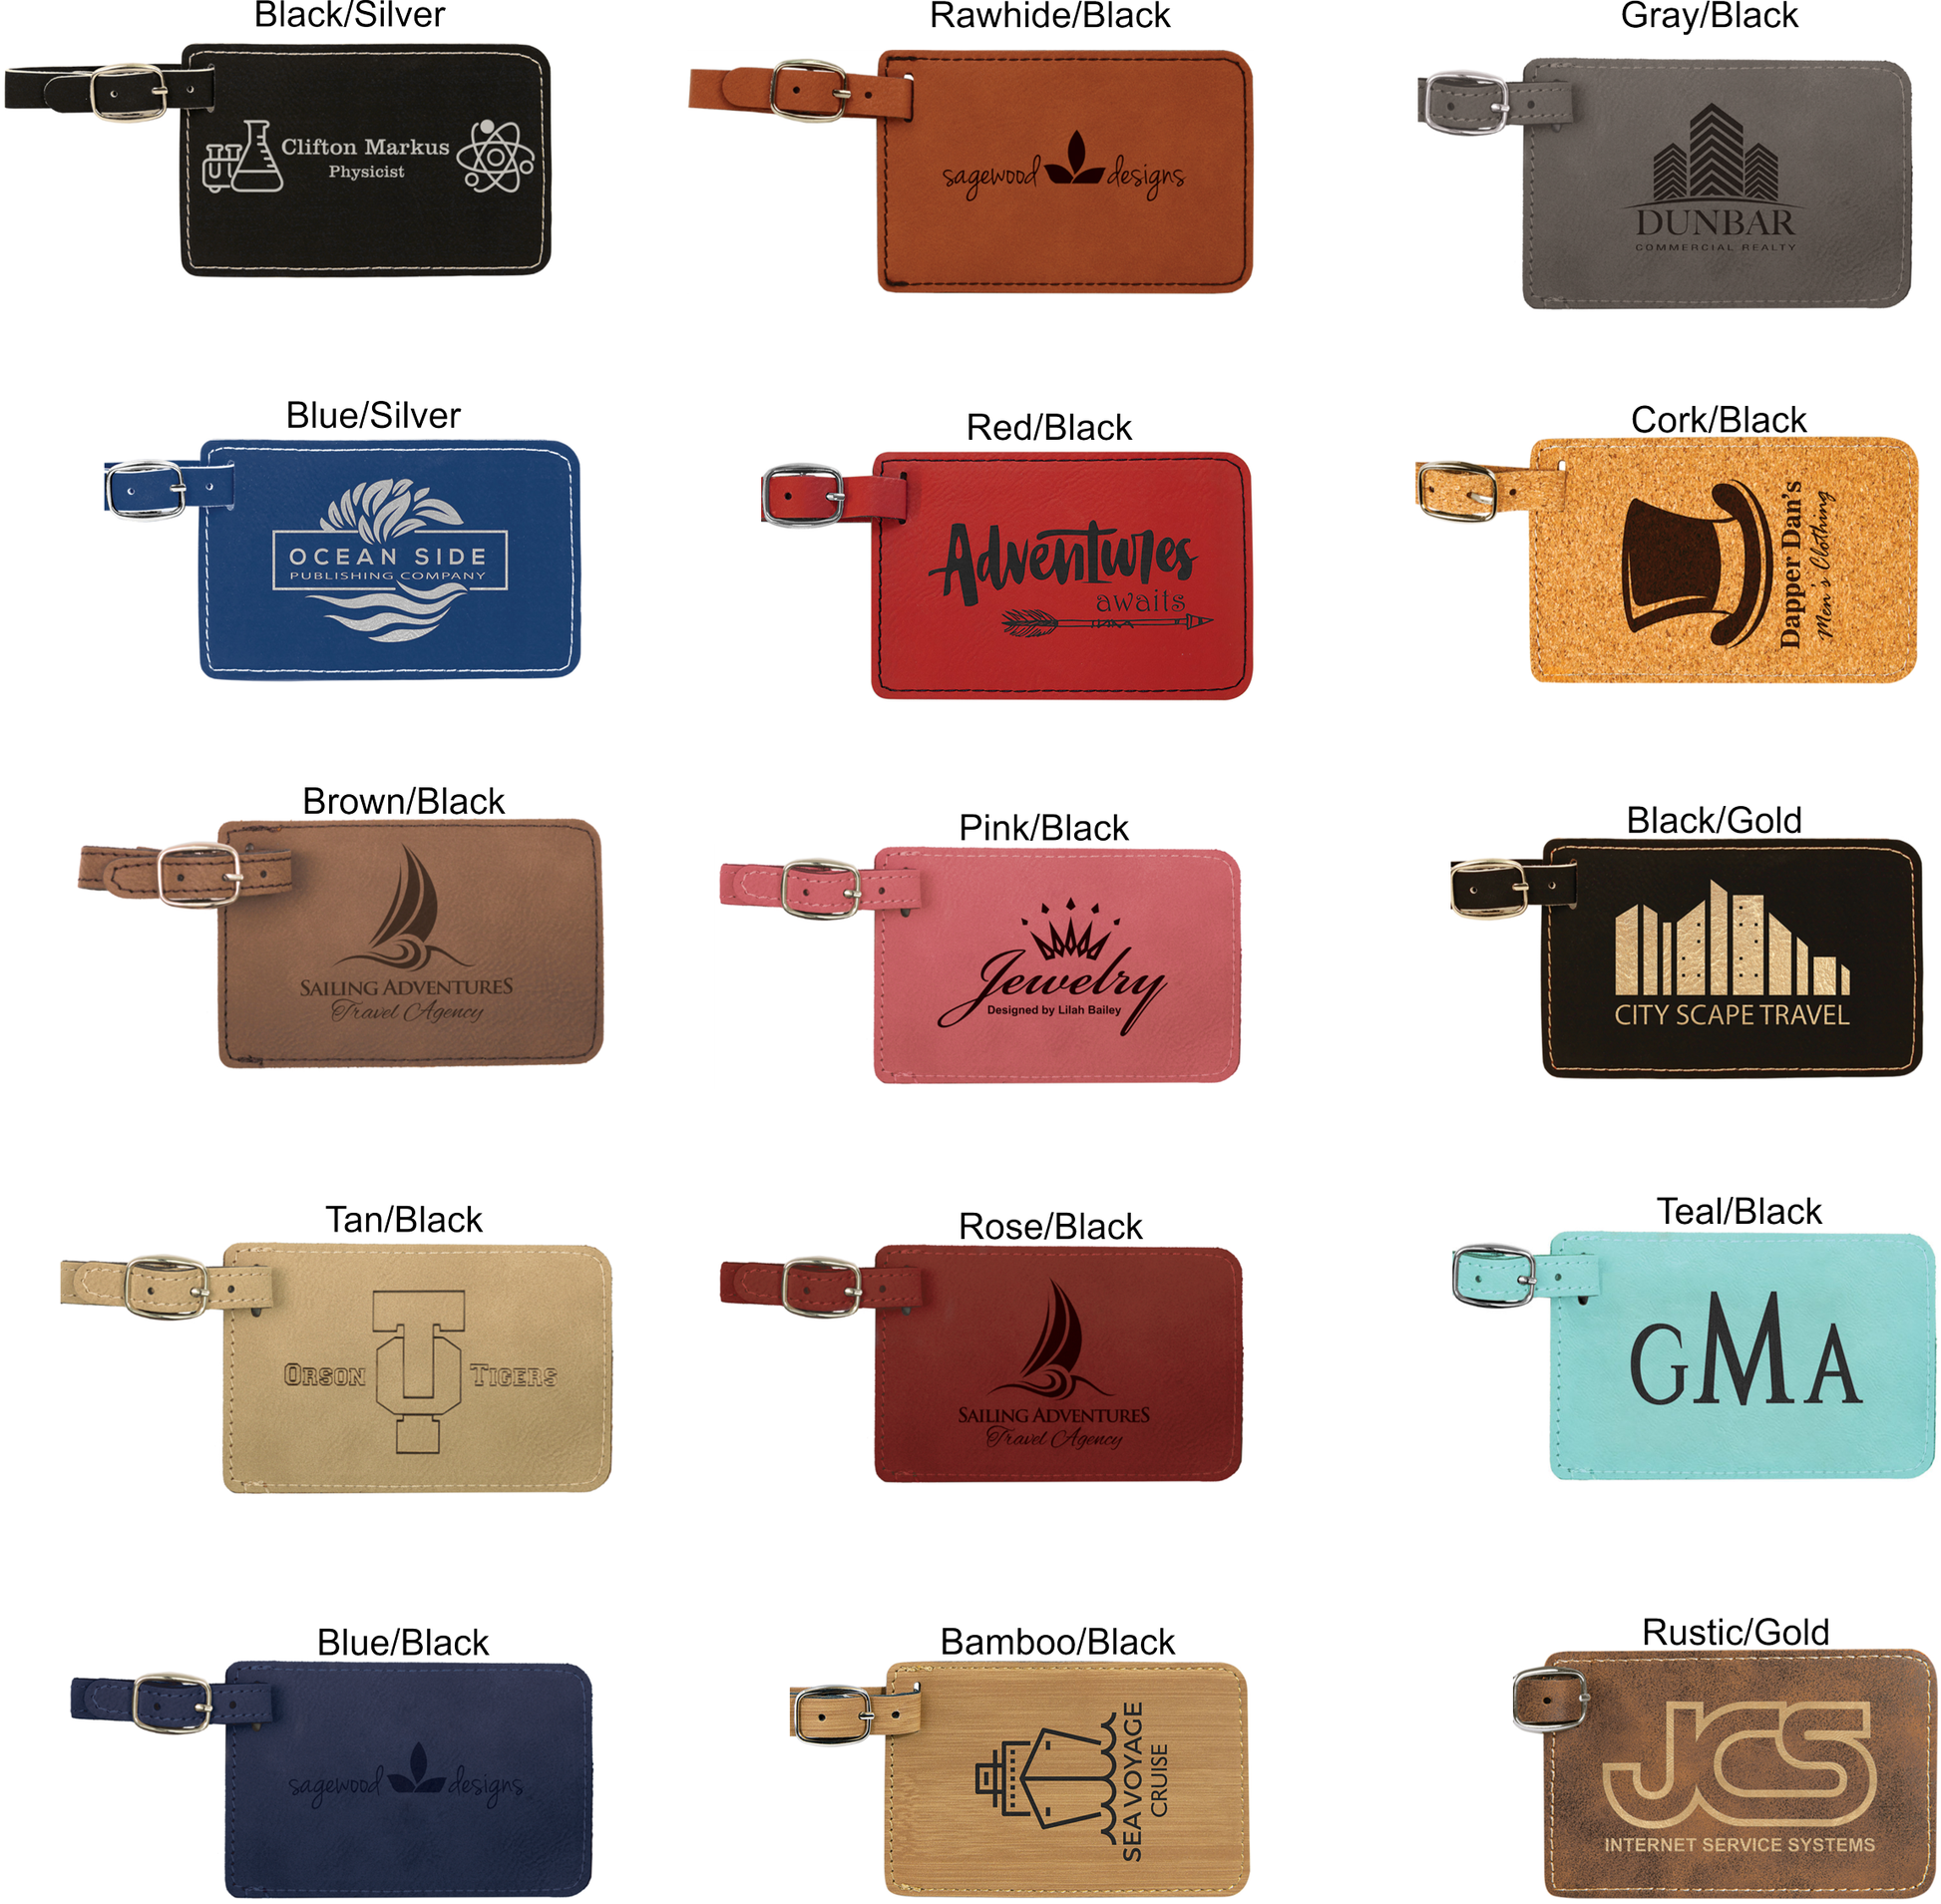 Patterned Name Meaning Personalized Luggage Tag Set